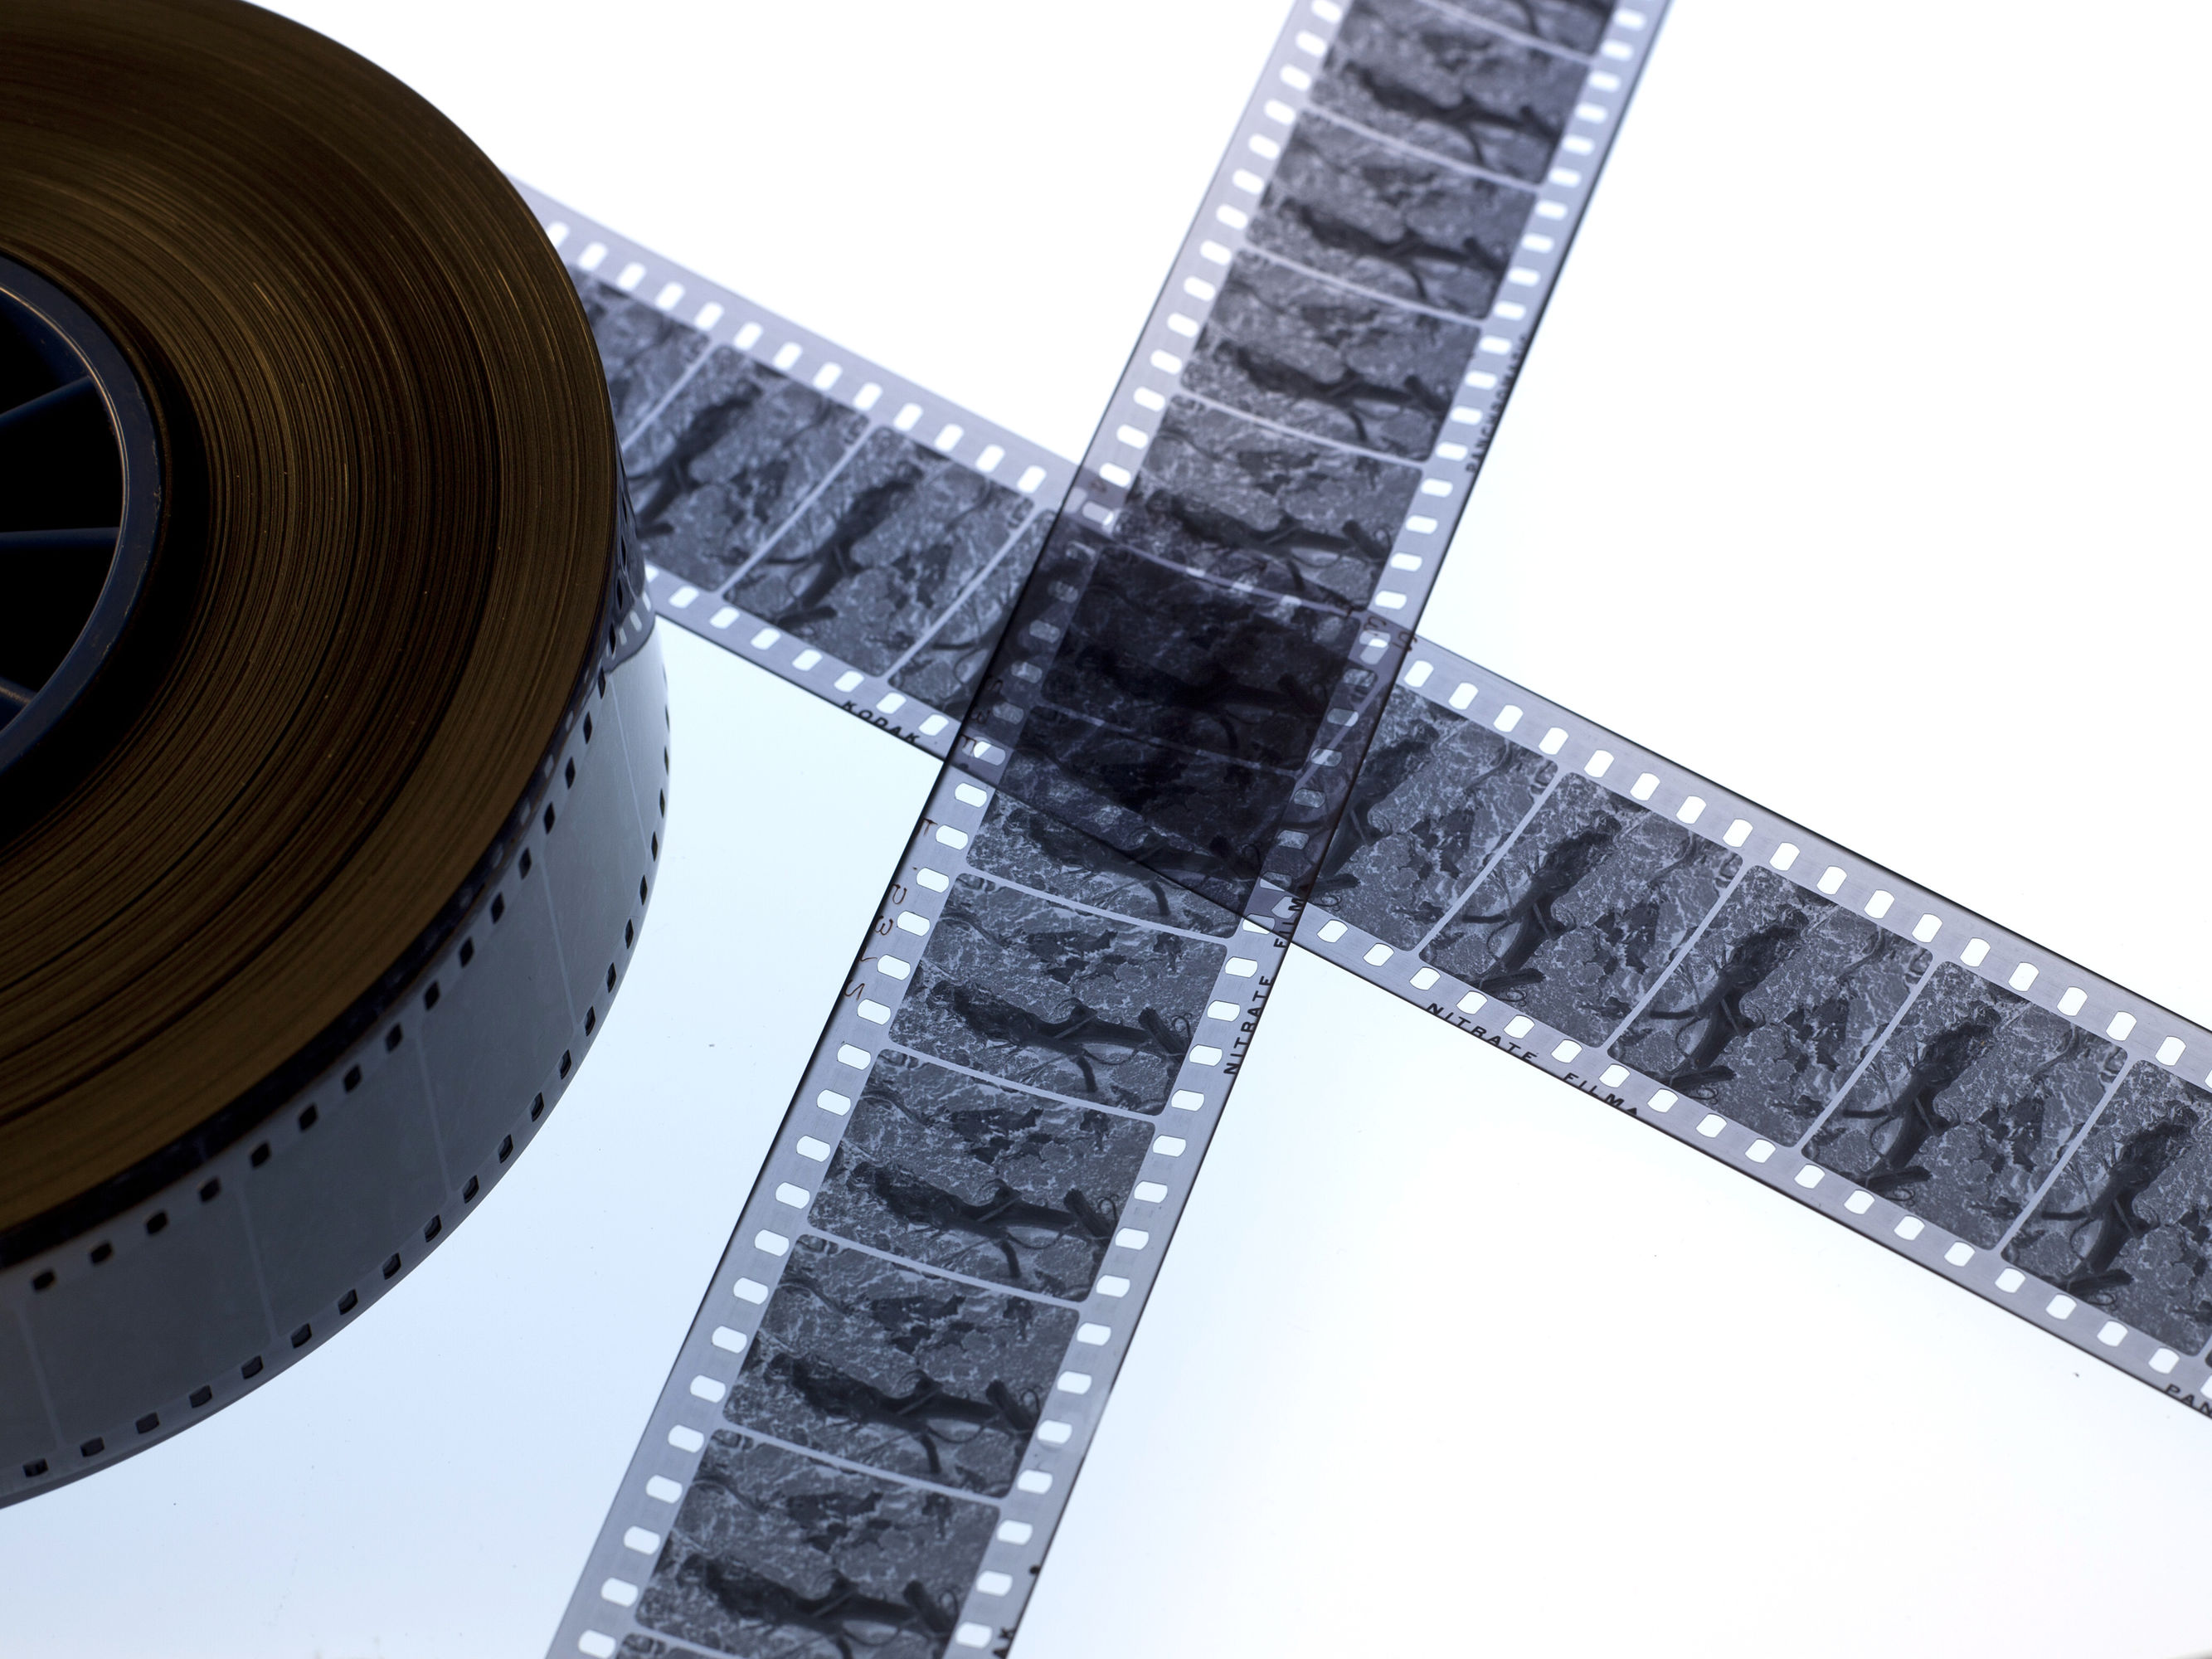 Every Old Film Reel Has A Story; Preserve Them Today With 8MM To